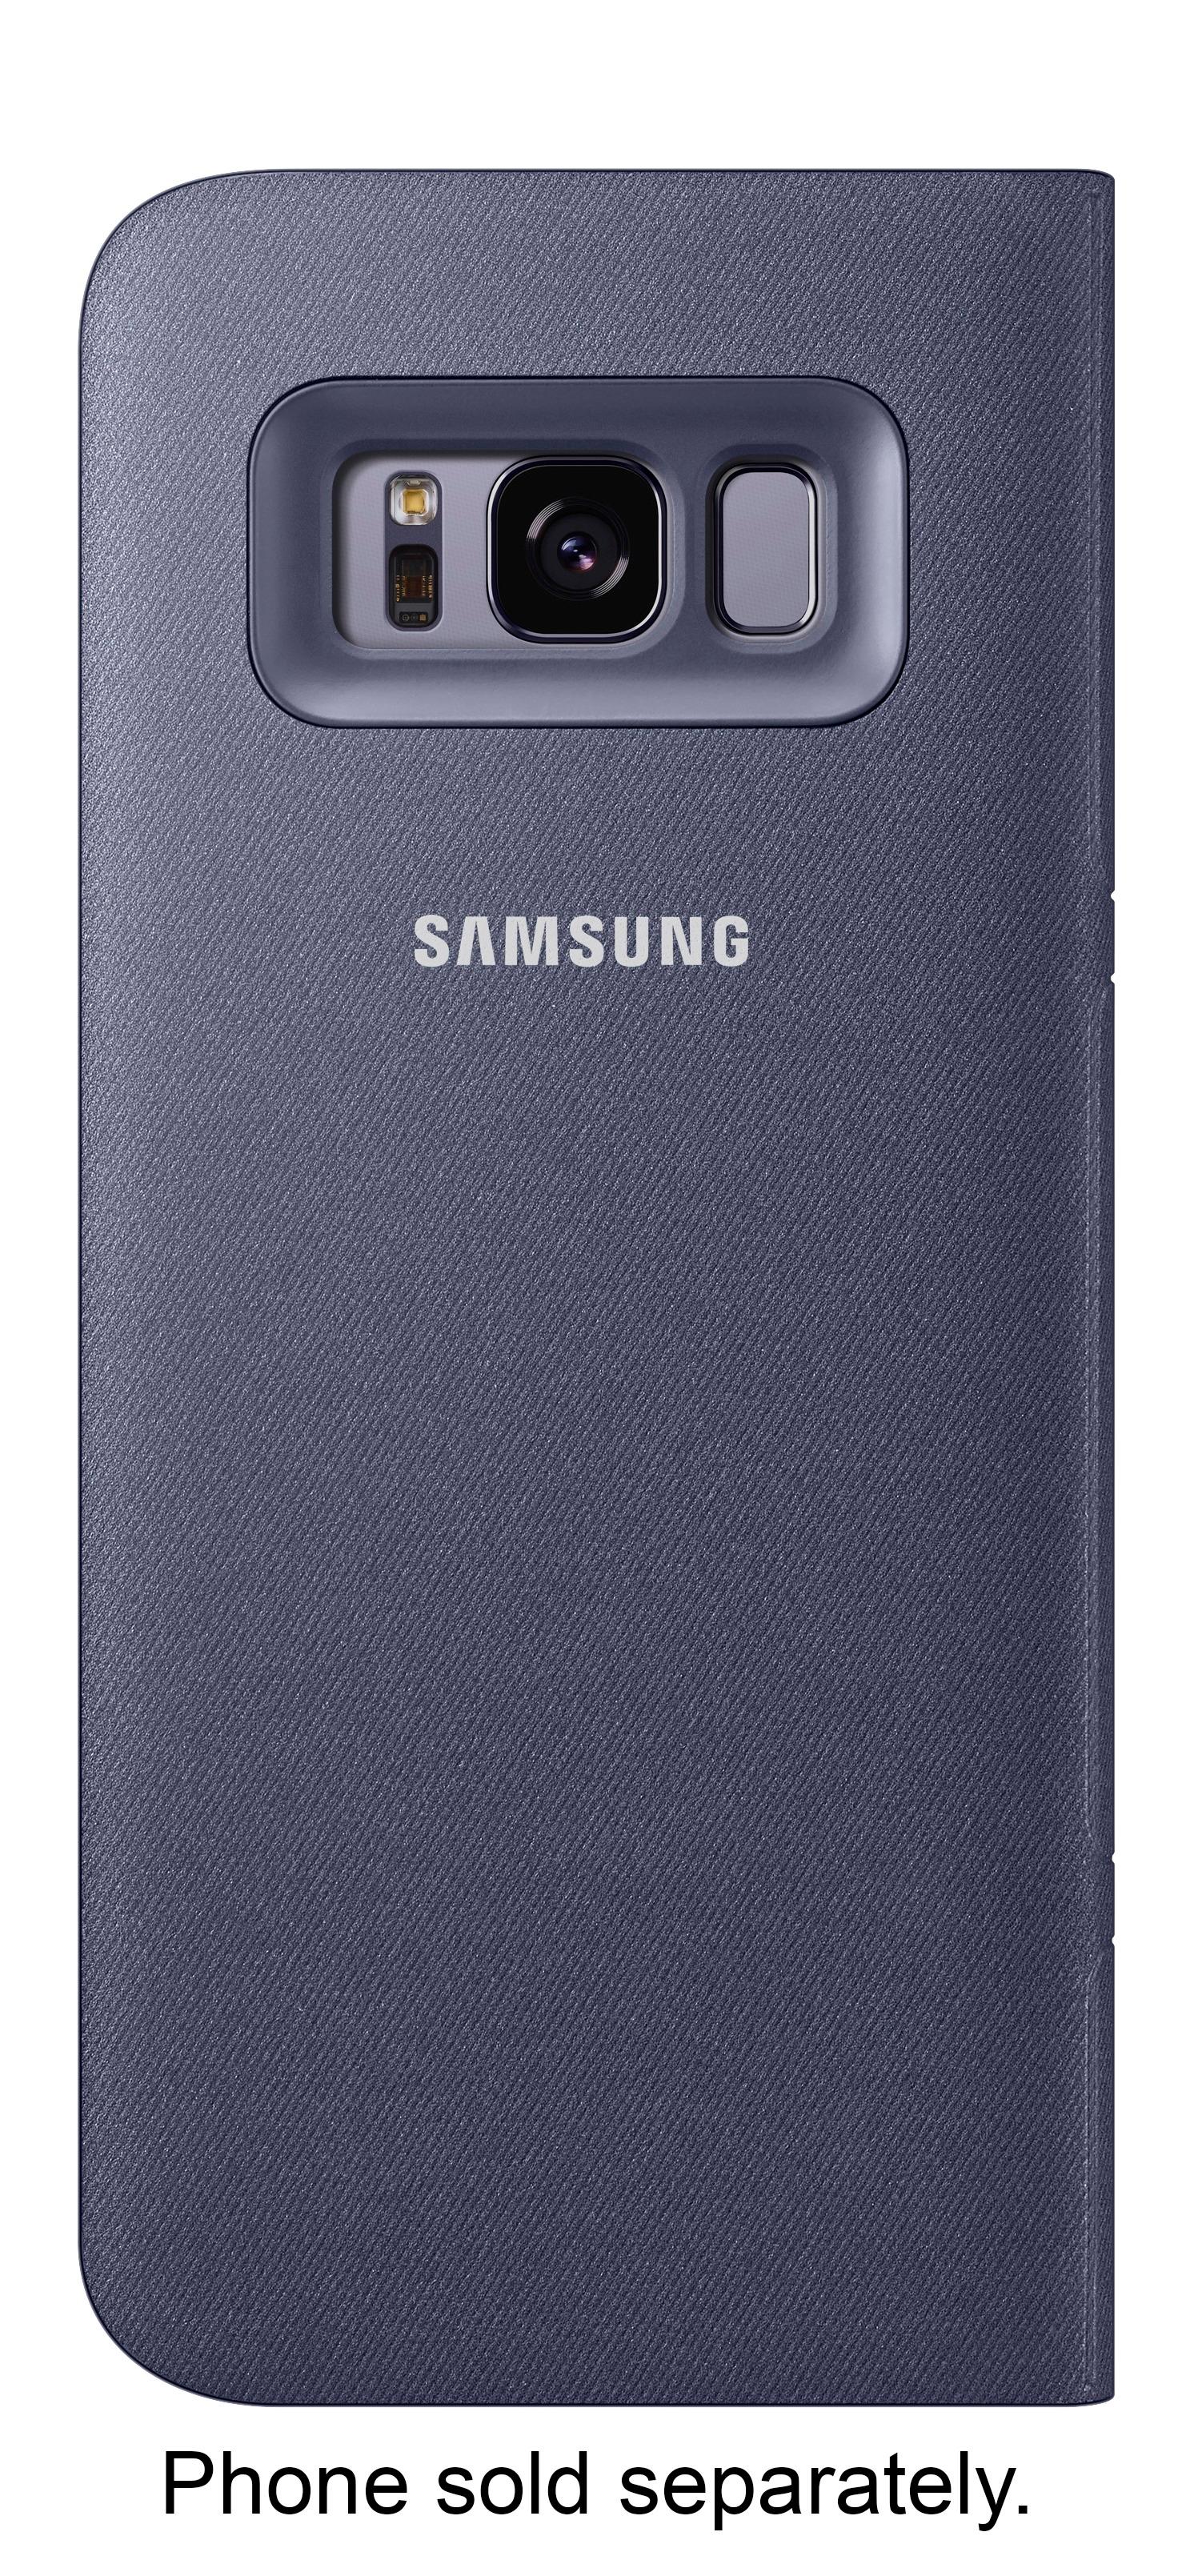 Buy: LED Wallet Cover for Samsung Galaxy Orchid Gray EF-NG950PVEGUS